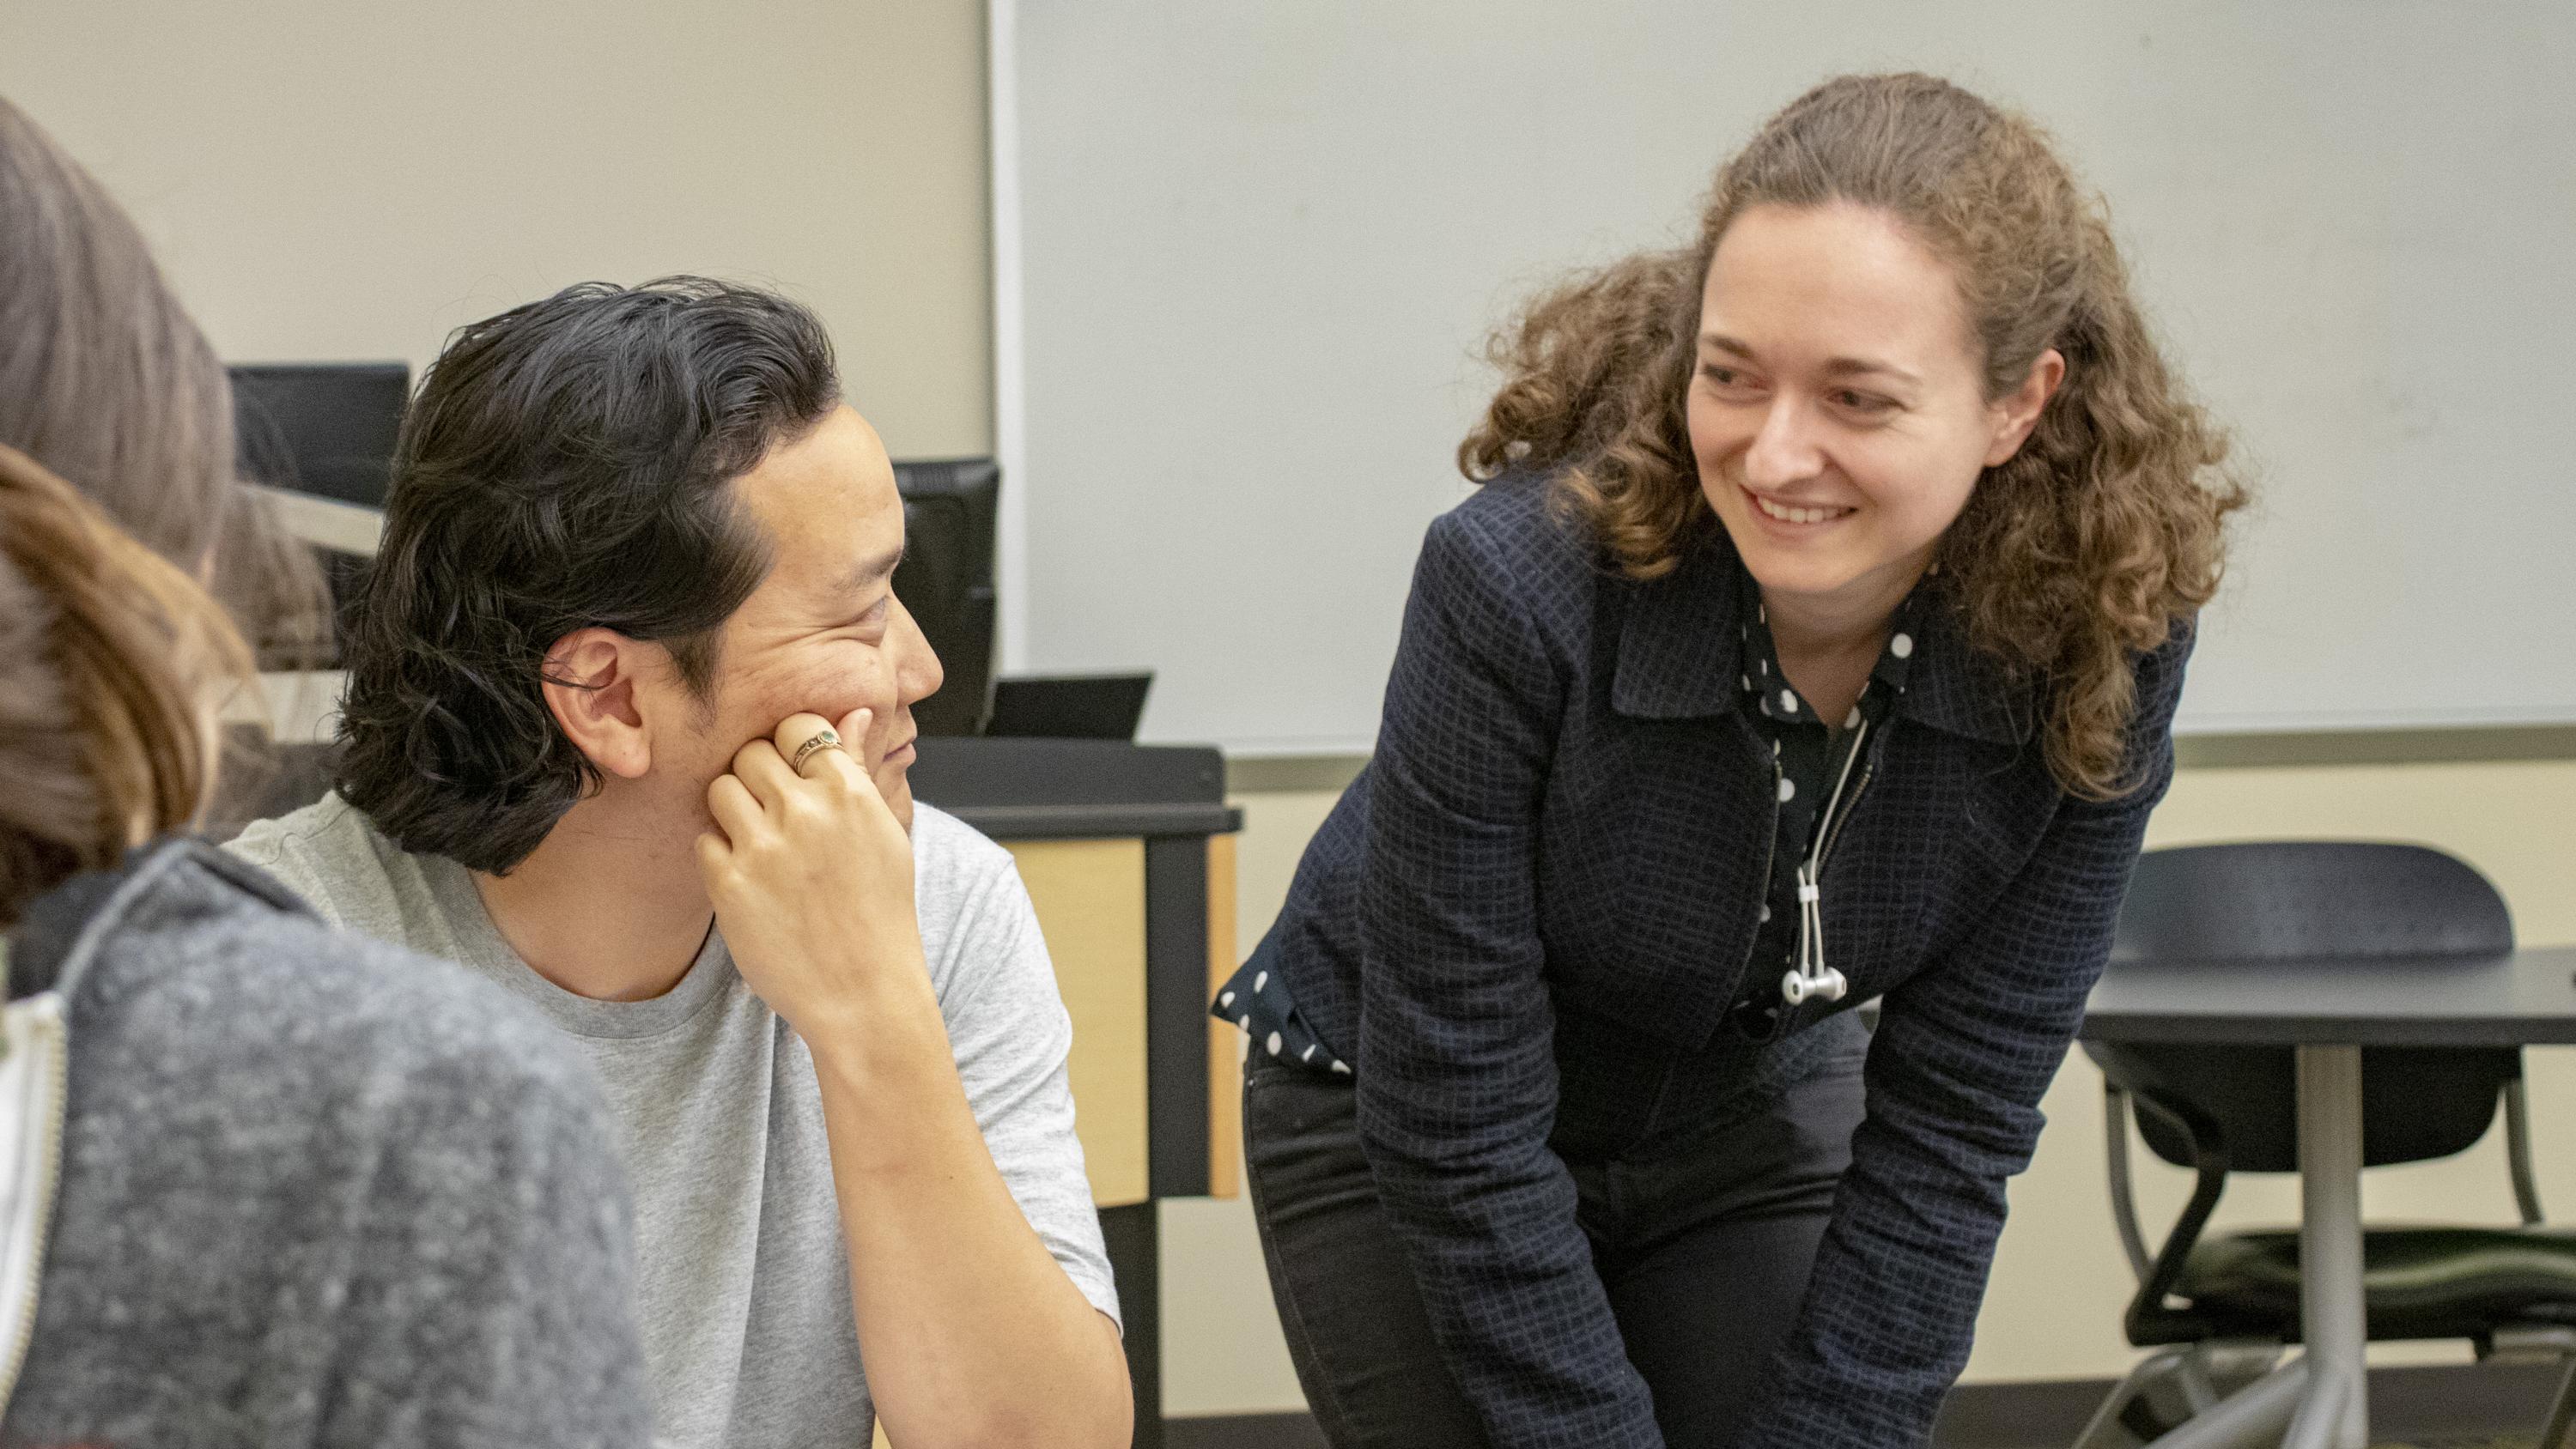 Daniel Youngchul Son, a graduate student in the School of City and Regional Planning, talks with Jenny Strakovsky, assistant director of career education and graduate programs in the School of Modern Languages, during a session of the Career Design for Global Citizenship course on April 17, 2019.